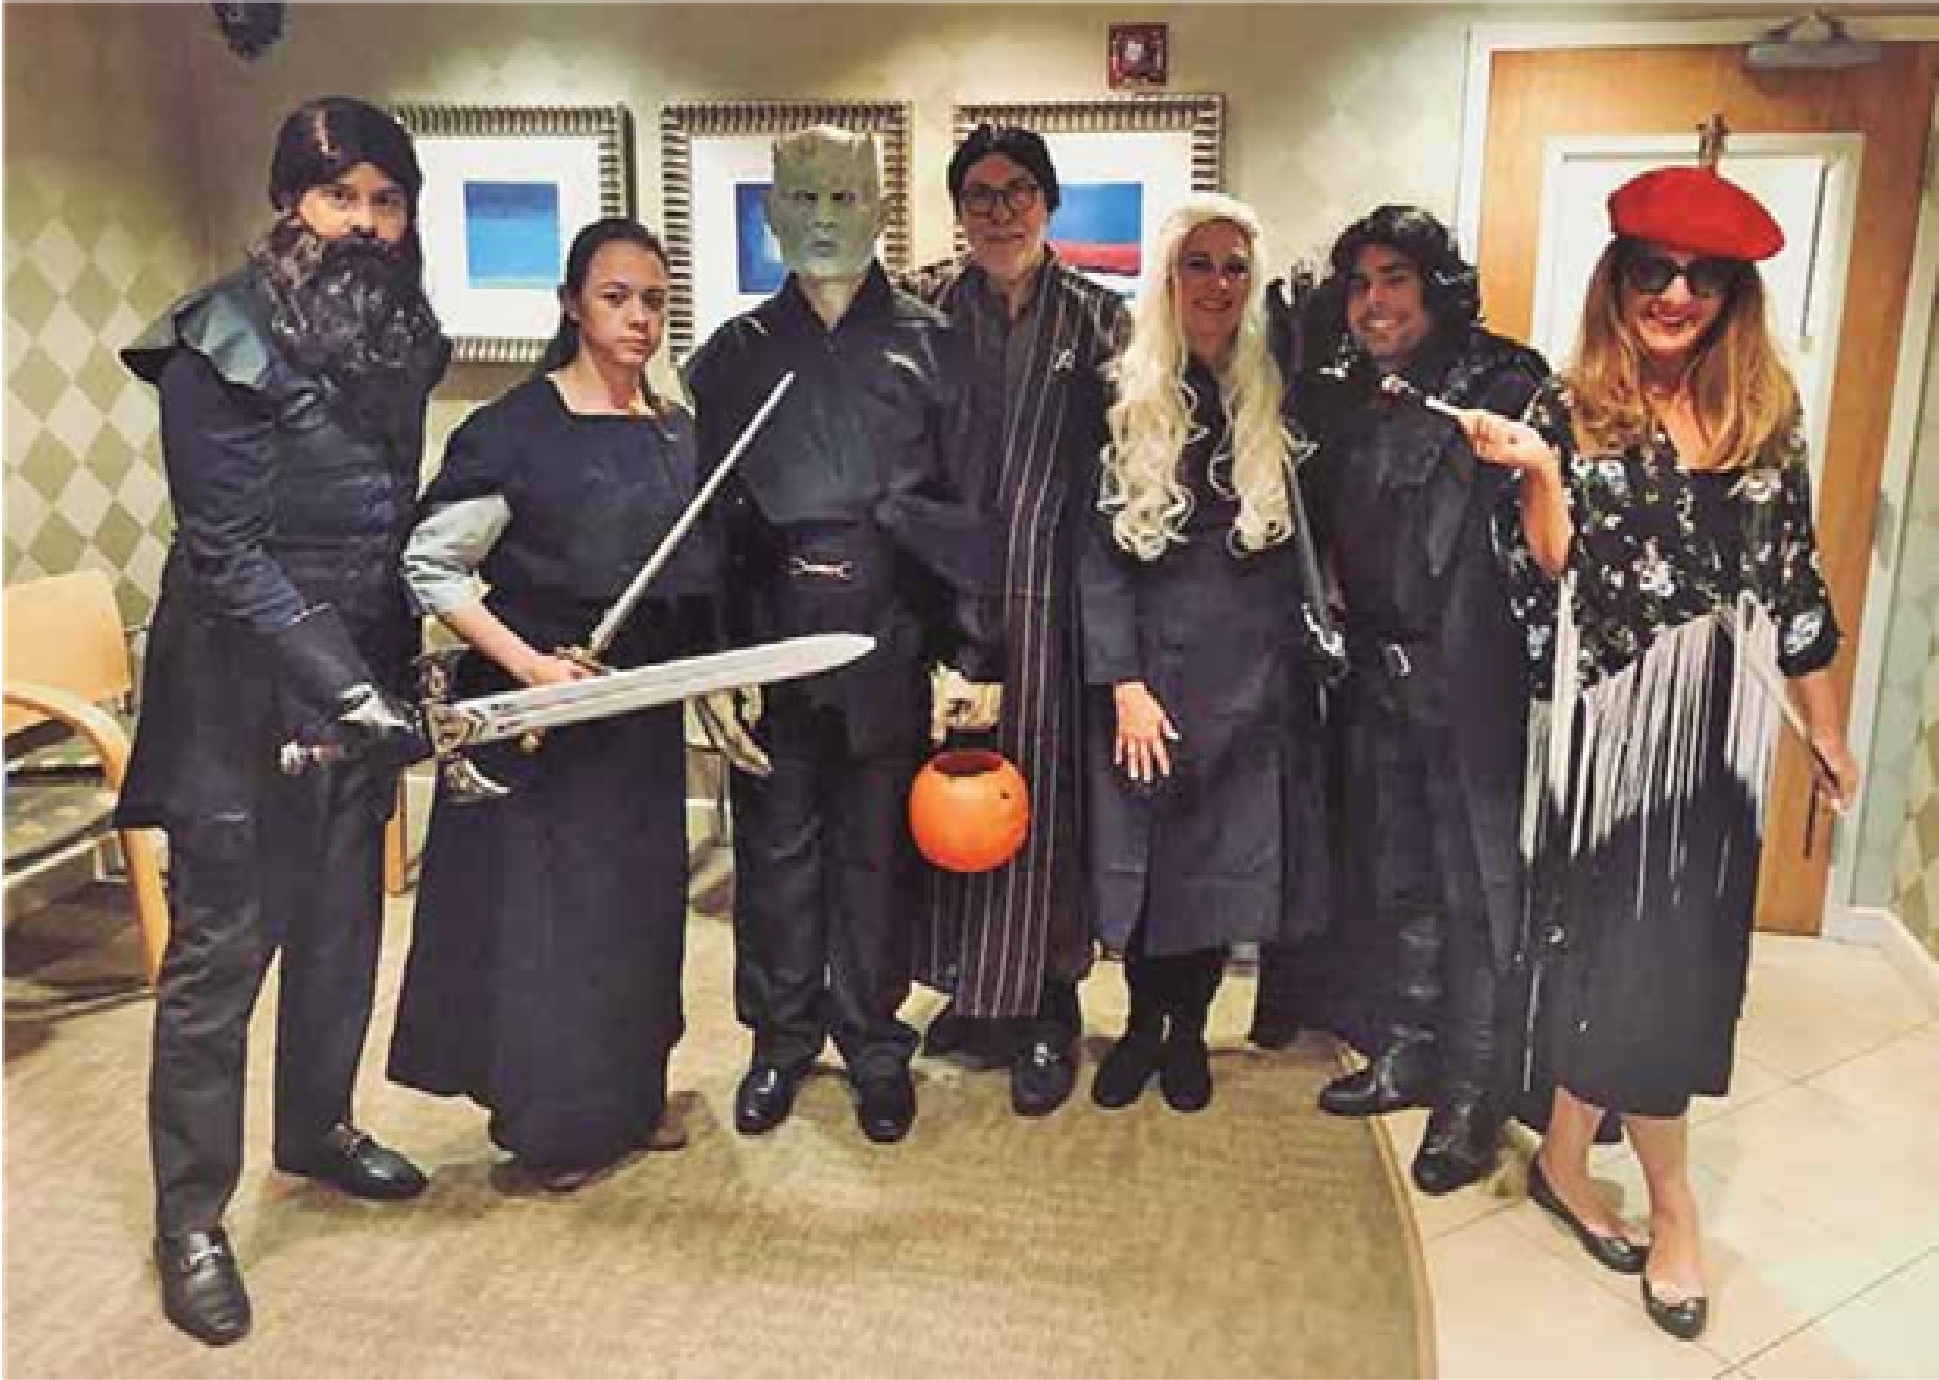 Coral Gables Hospital Celebrates Halloween Game of Thrones Style El